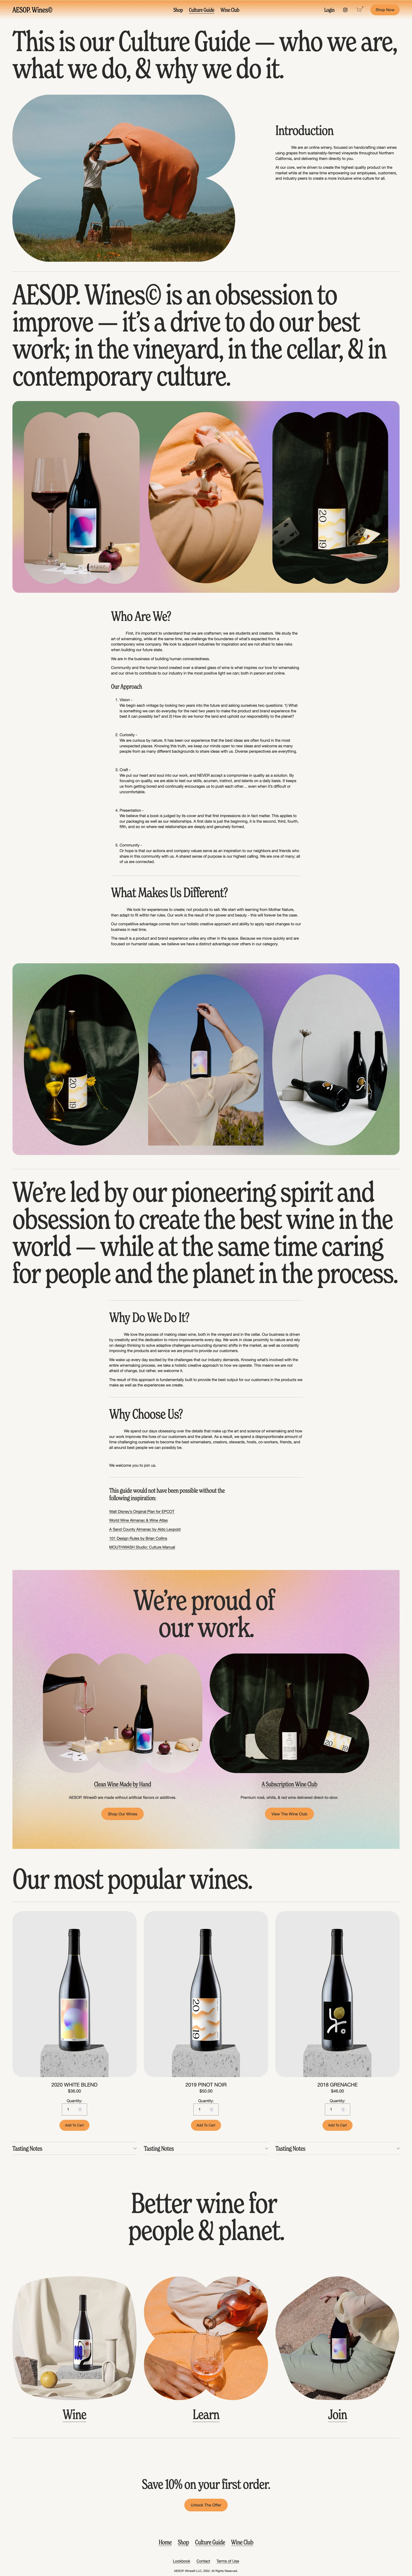 AESOP.Wines Landing Page Example: AESOP. Wines is an online winery making clean wine in California — with direct-to-door delivery.